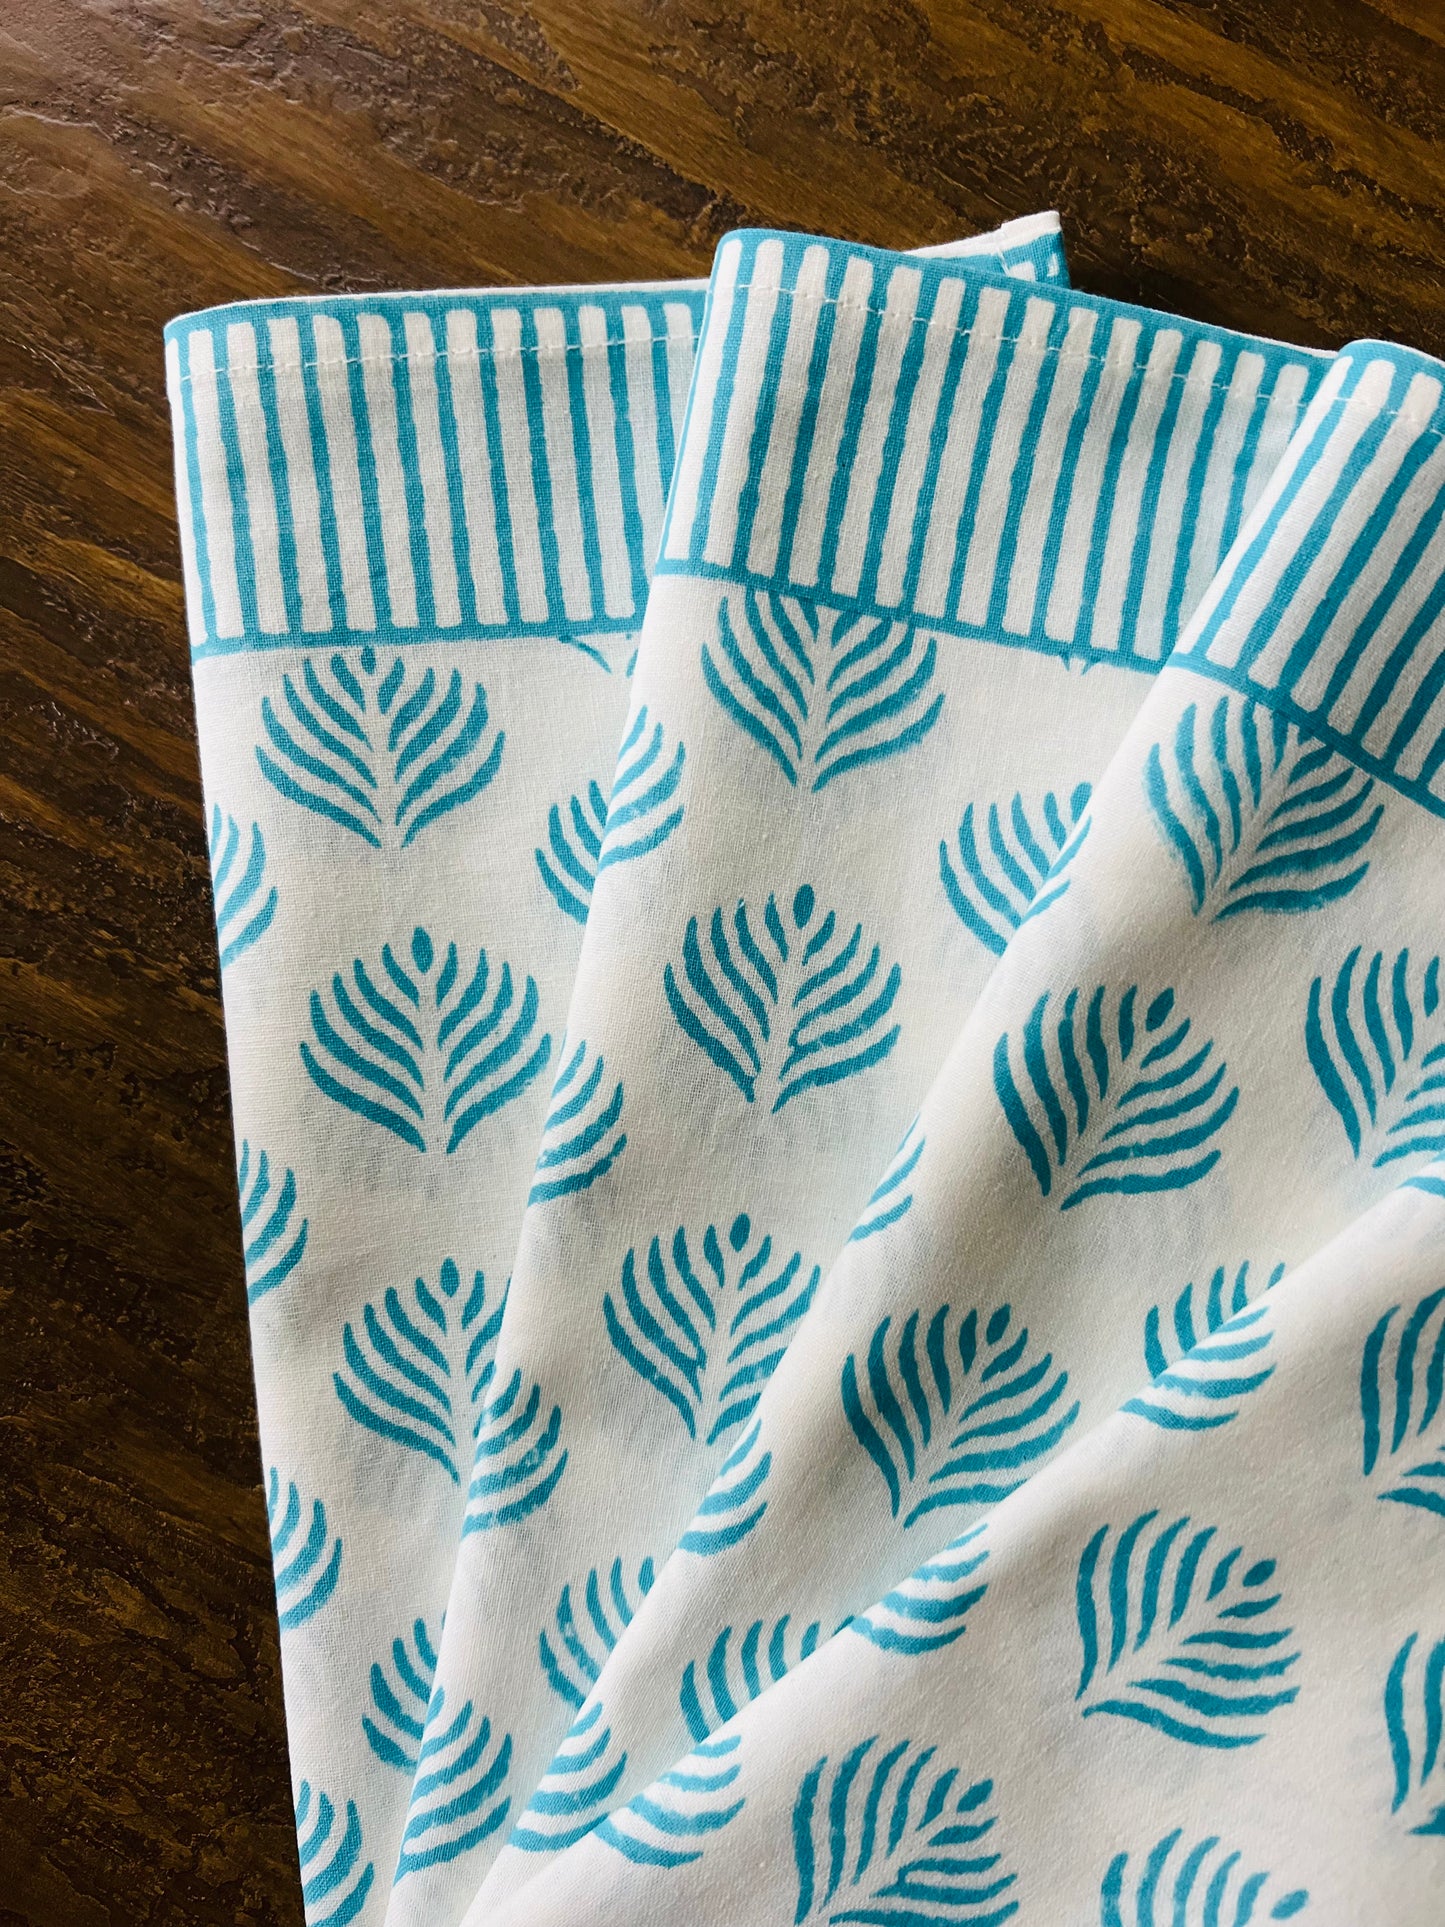 Coral Flame Napkins in Turquoise - Set of 4